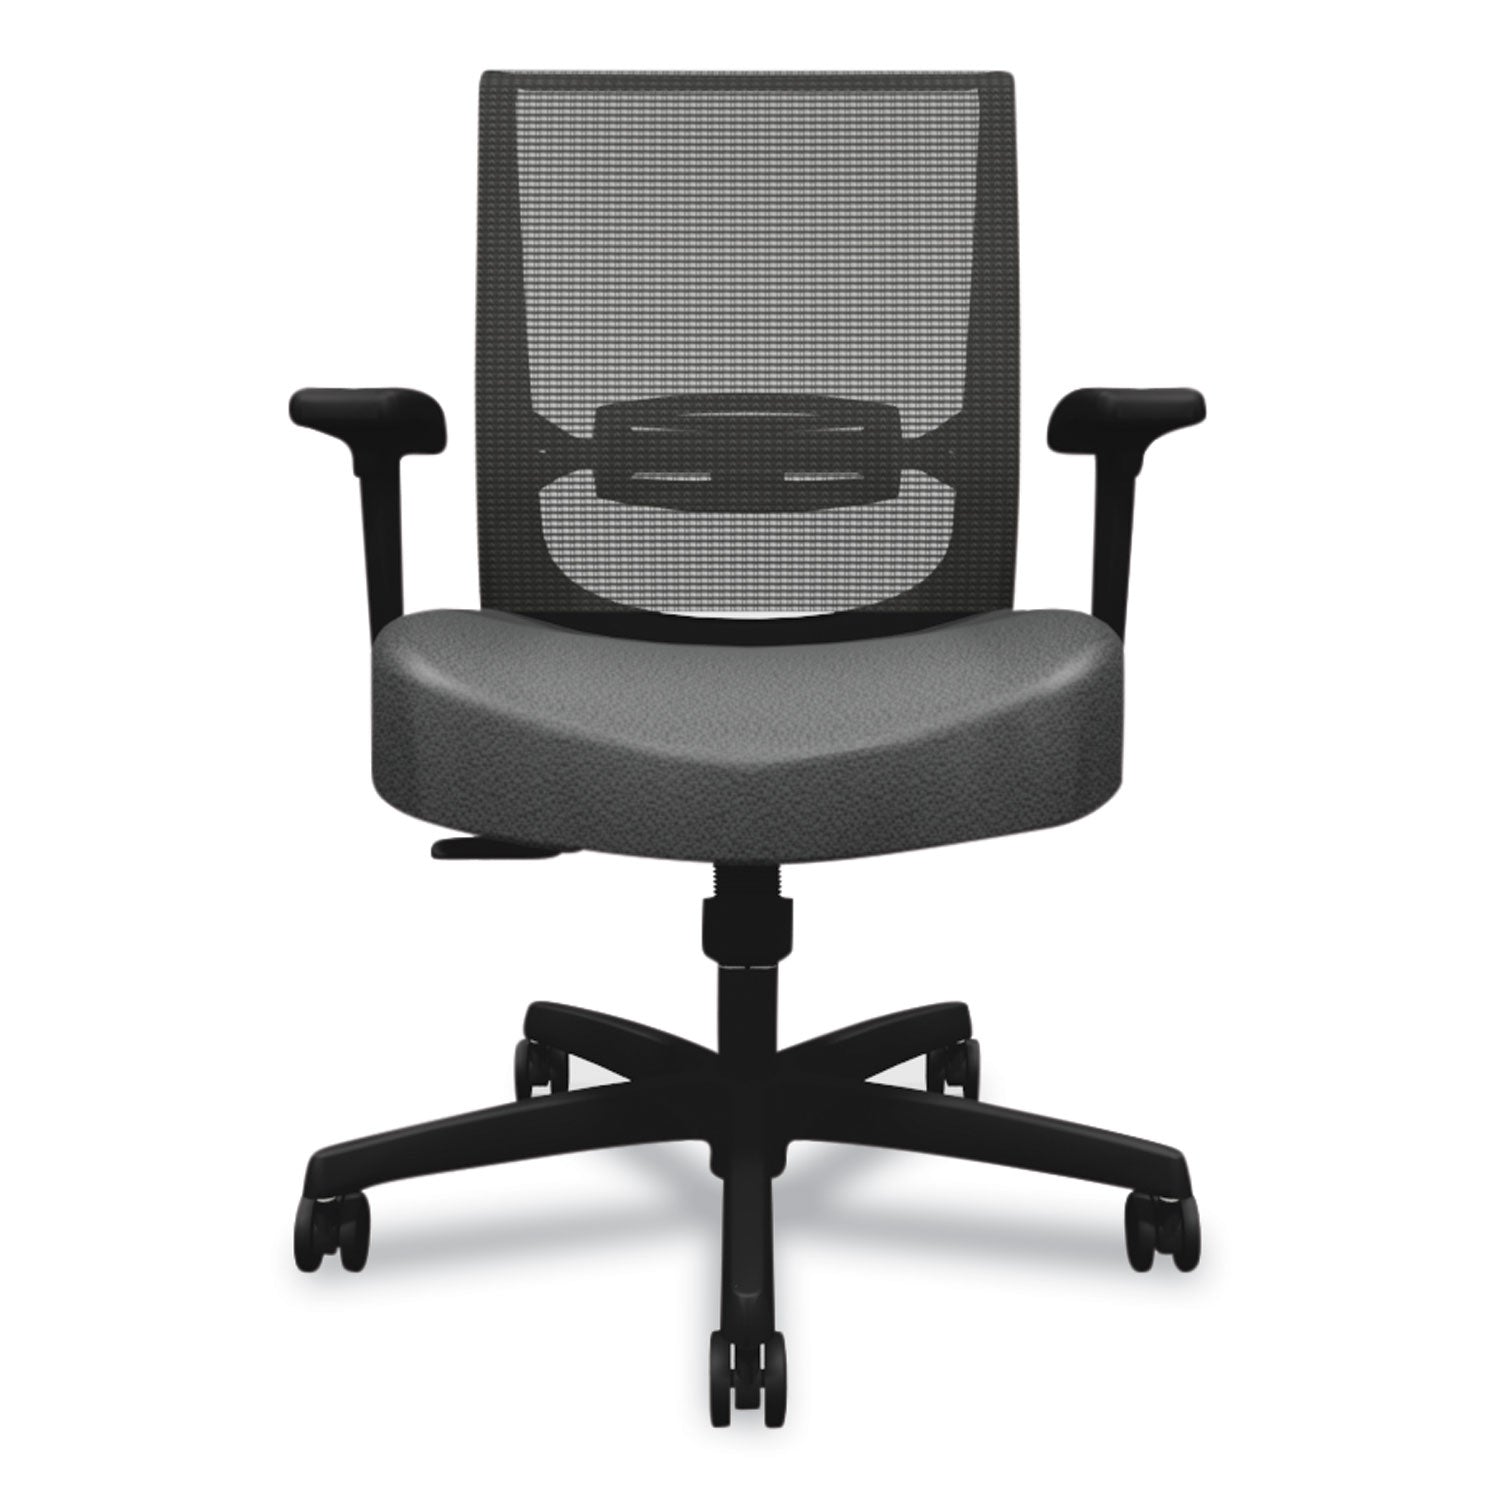 convergence-mid-back-task-chair-swivel-tilt-supports-up-to-275-lb-165-to-21-seat-height-iron-ore-seat-black-back-base_honcmz1acu19 - 2